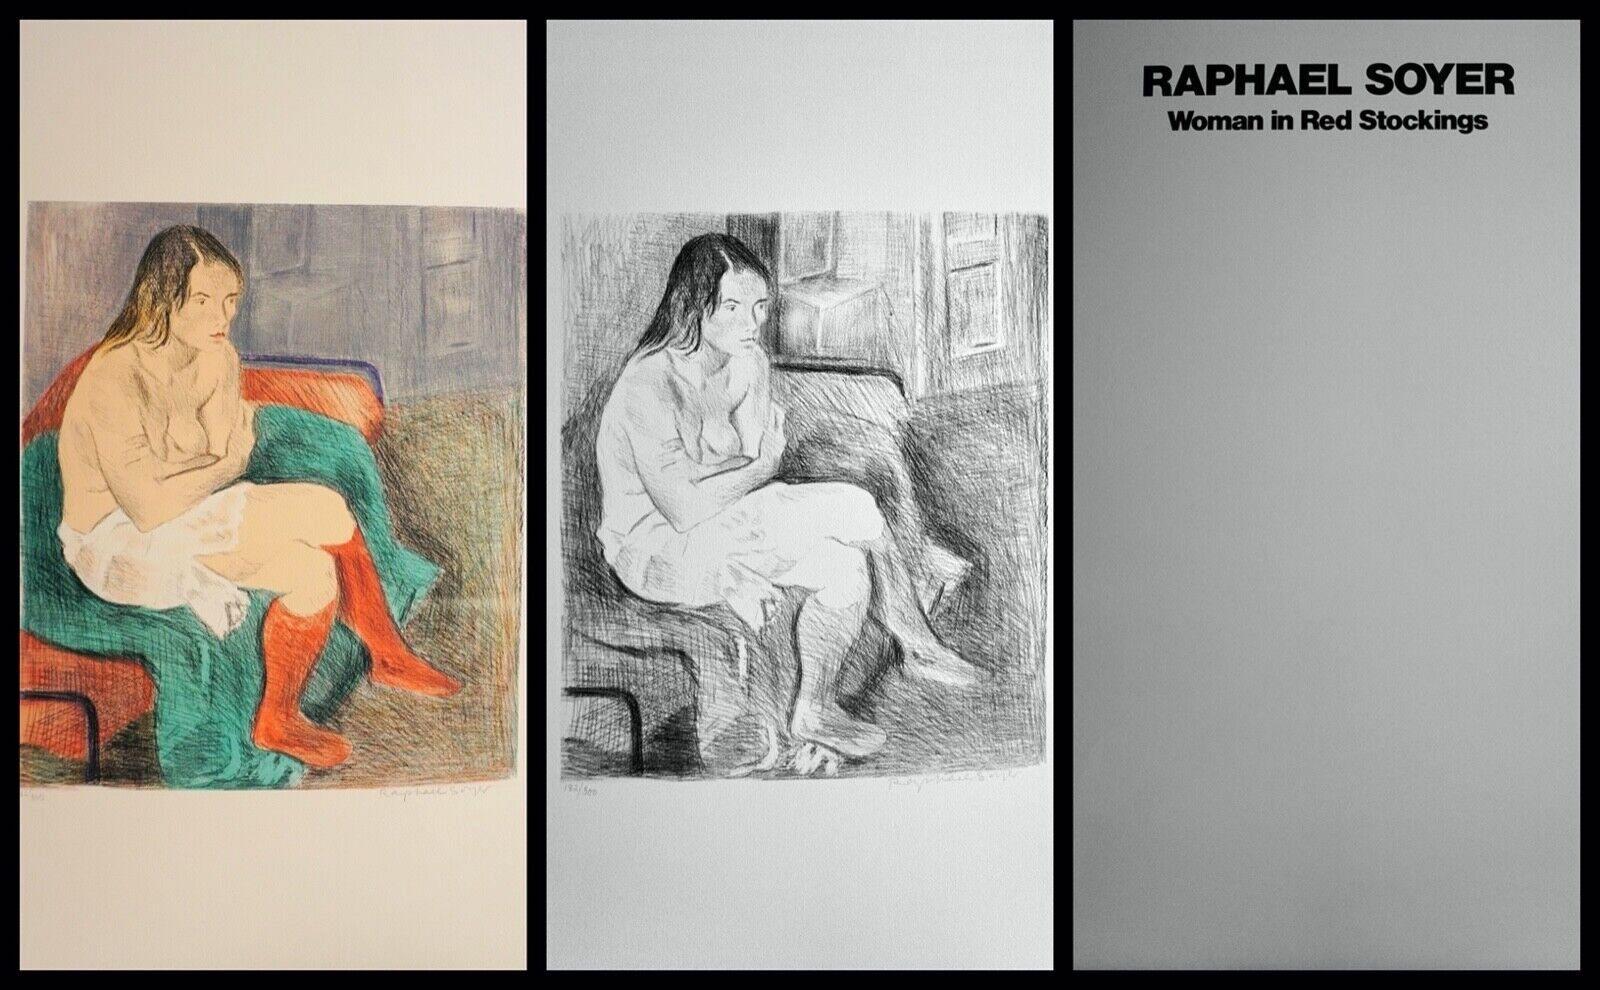 Raphael Soyer Print - Woman in Red Stockings Portfolio (2 lithographs)